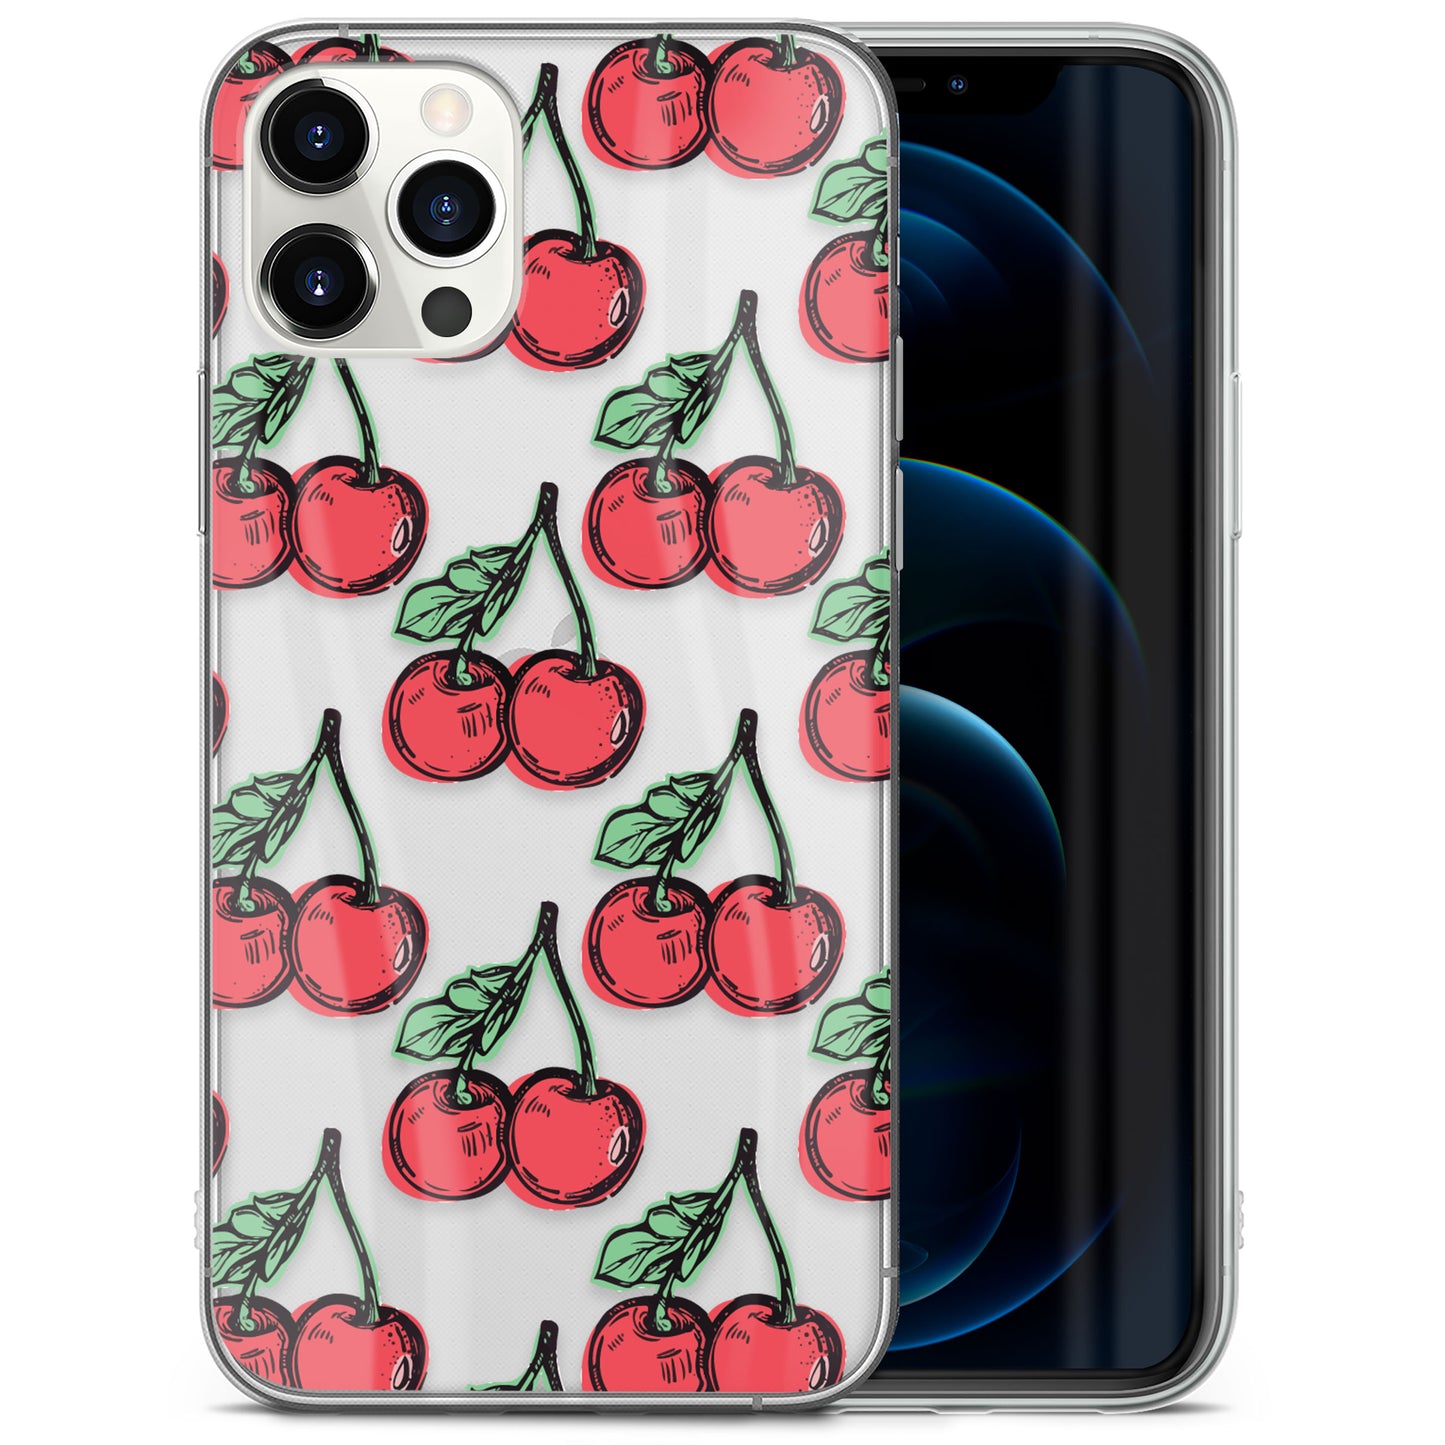 TPU Clear case with (Cherries) Design for iPhone & Samsung Phones